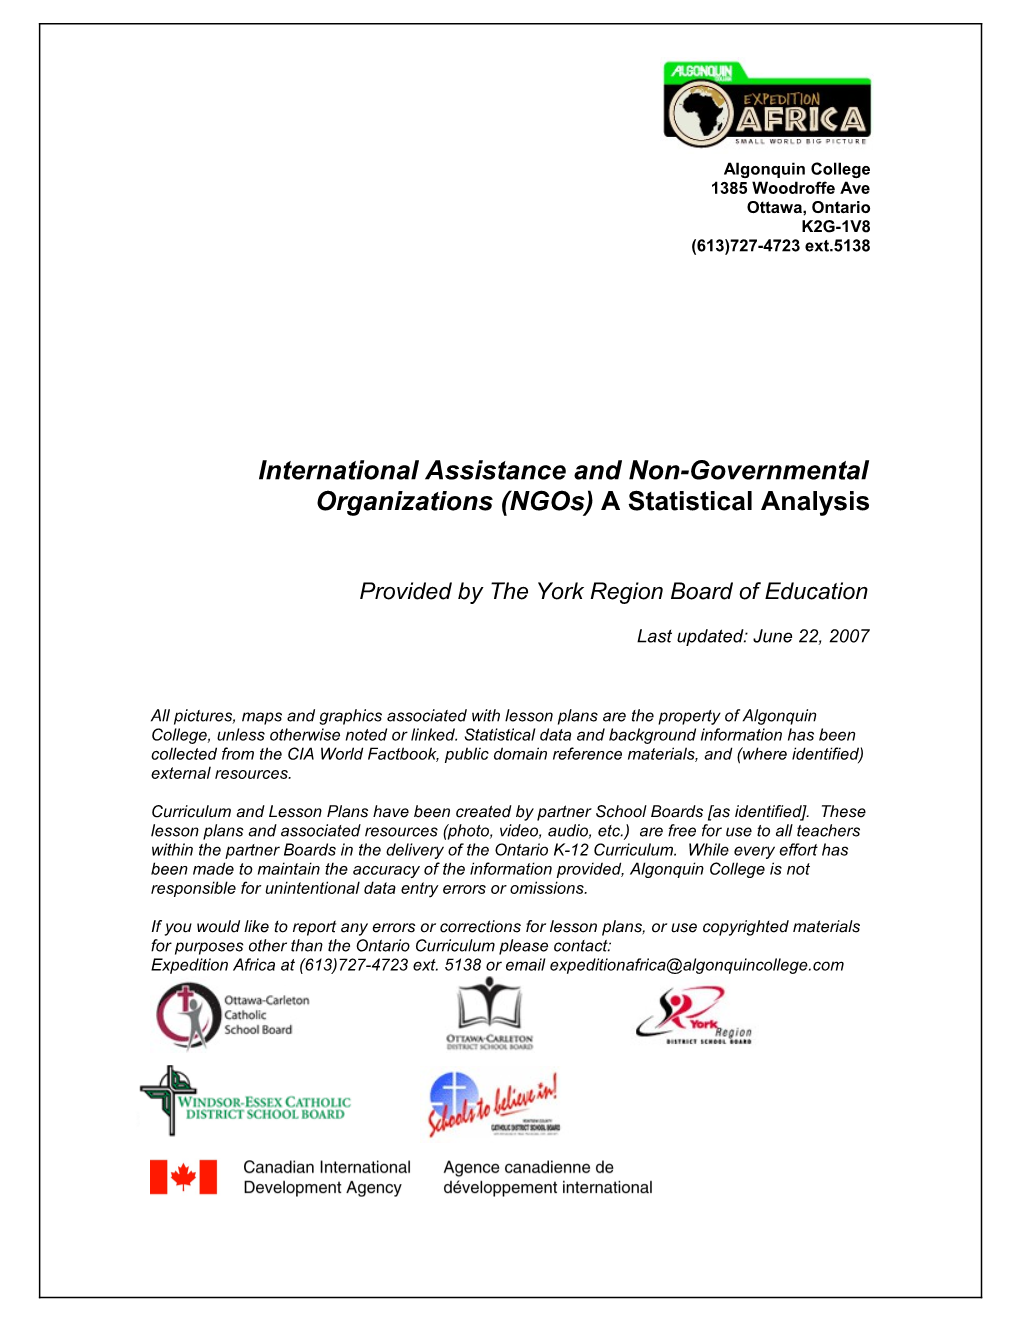 International Assistance and Non-Governmental Organizations (Ngos) a Statistical Analysis